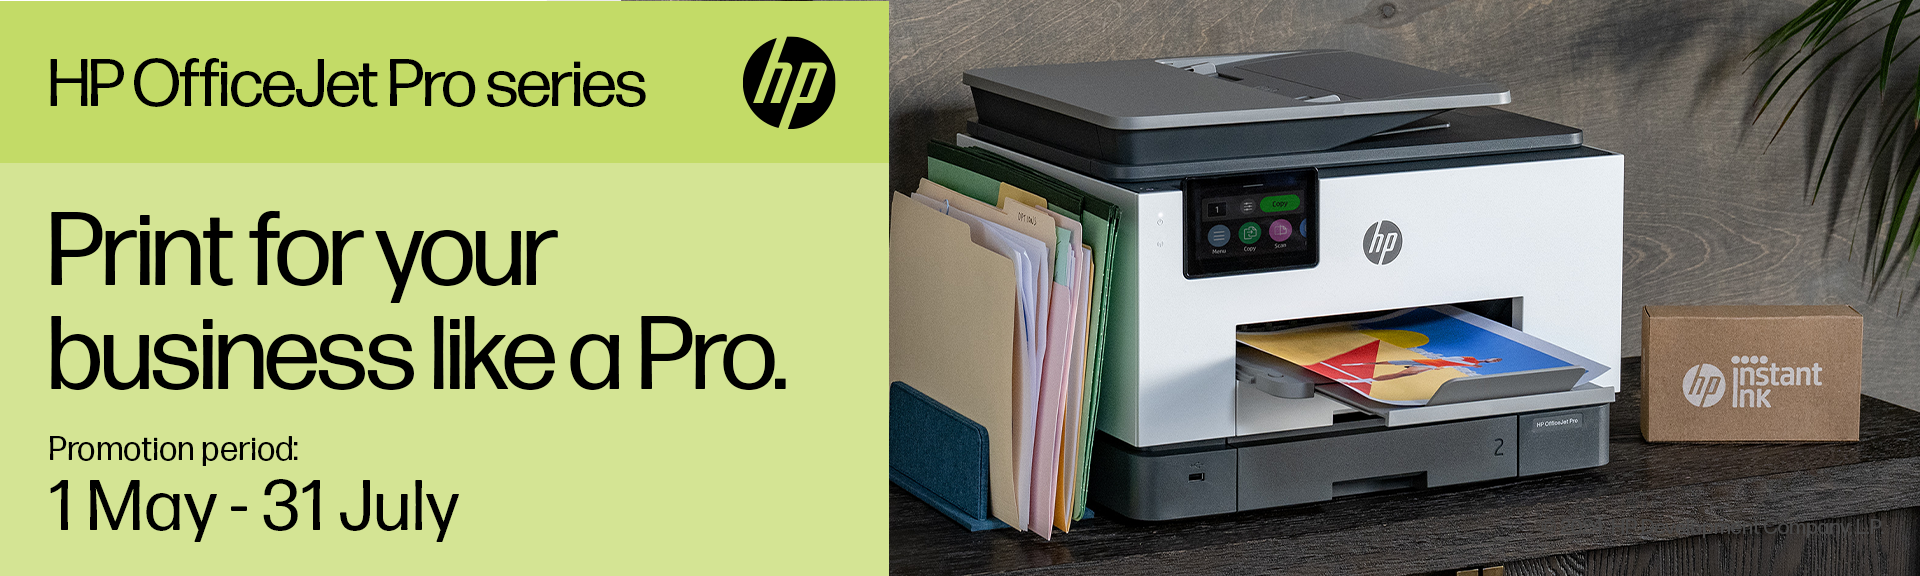 HP End User Retail Print Promotion